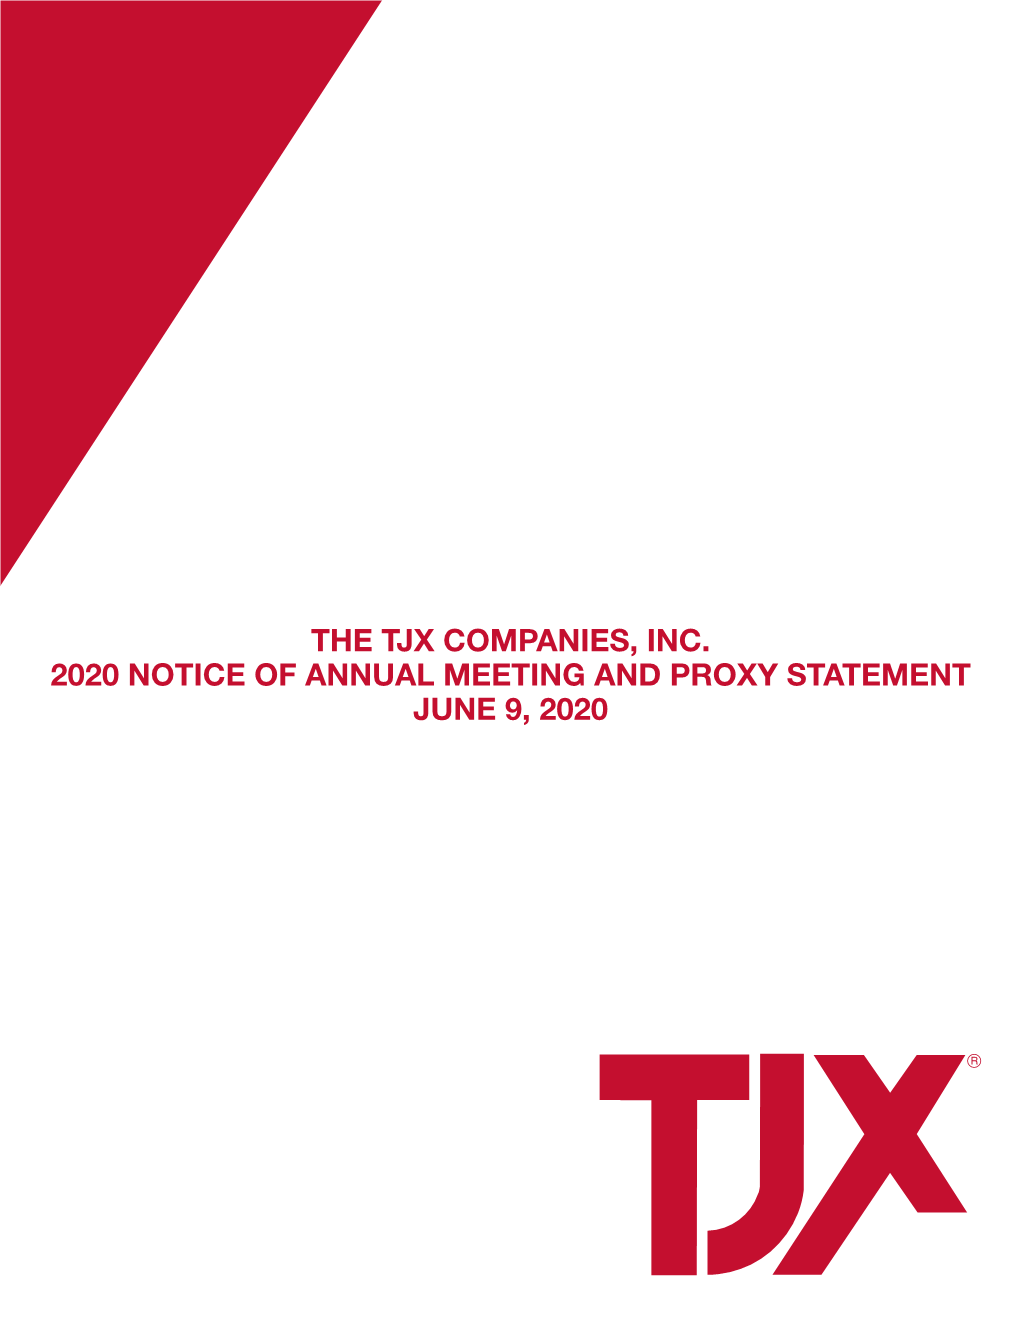 The Tjx Companies, Inc. 2020 Notice of Annual Meeting and Proxy Statement June 9, 2020